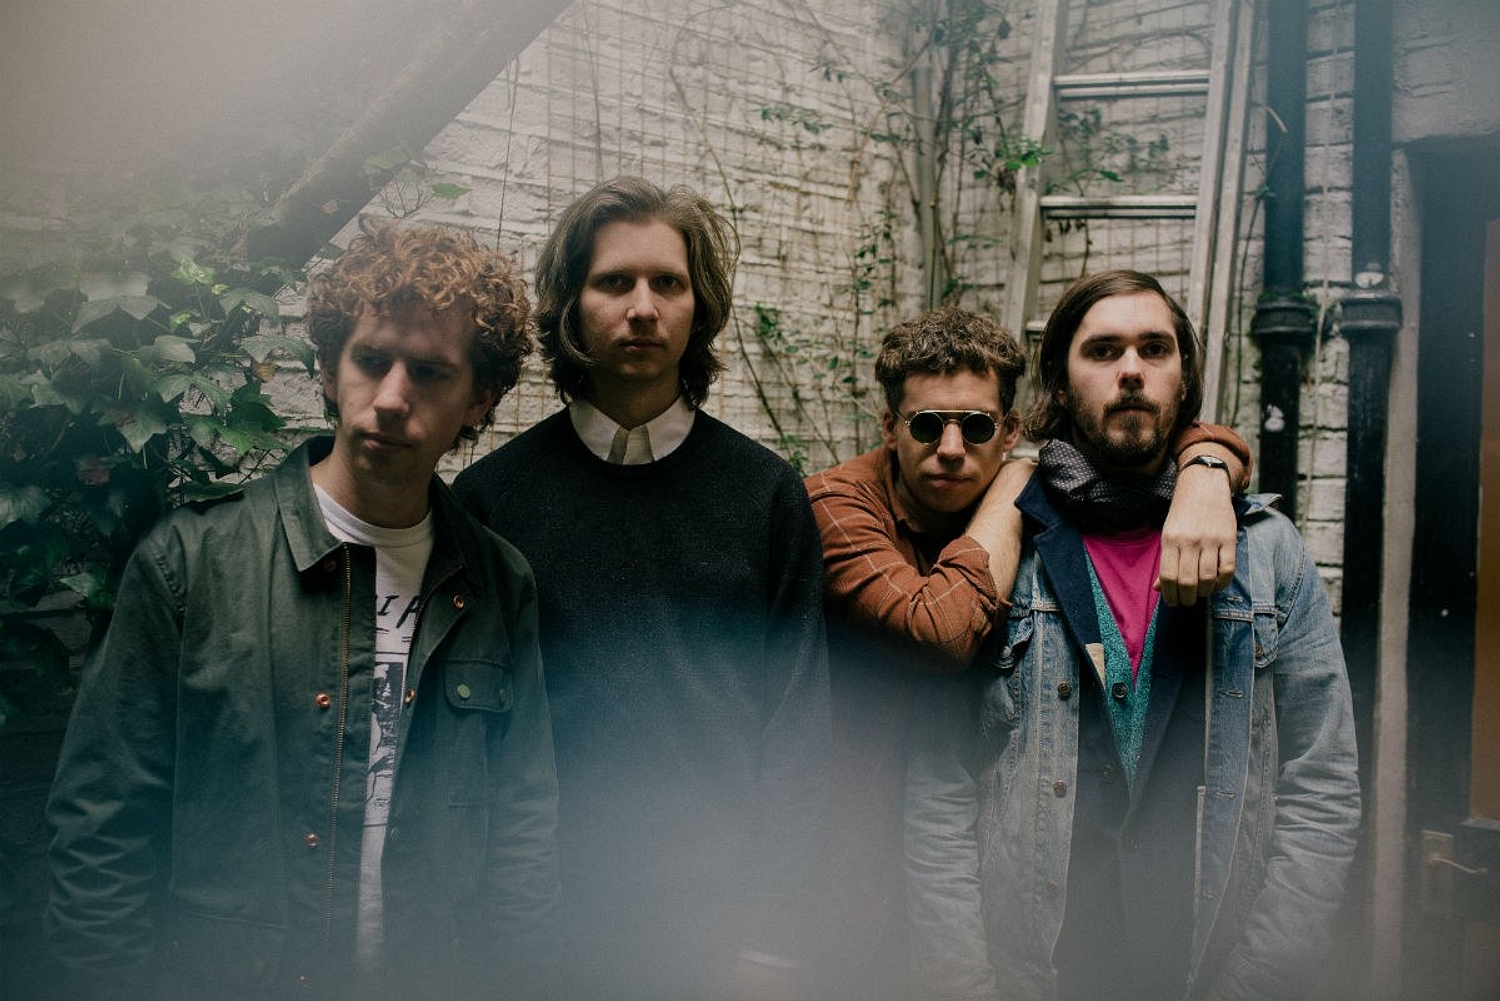 Acting Class: Parquet Courts